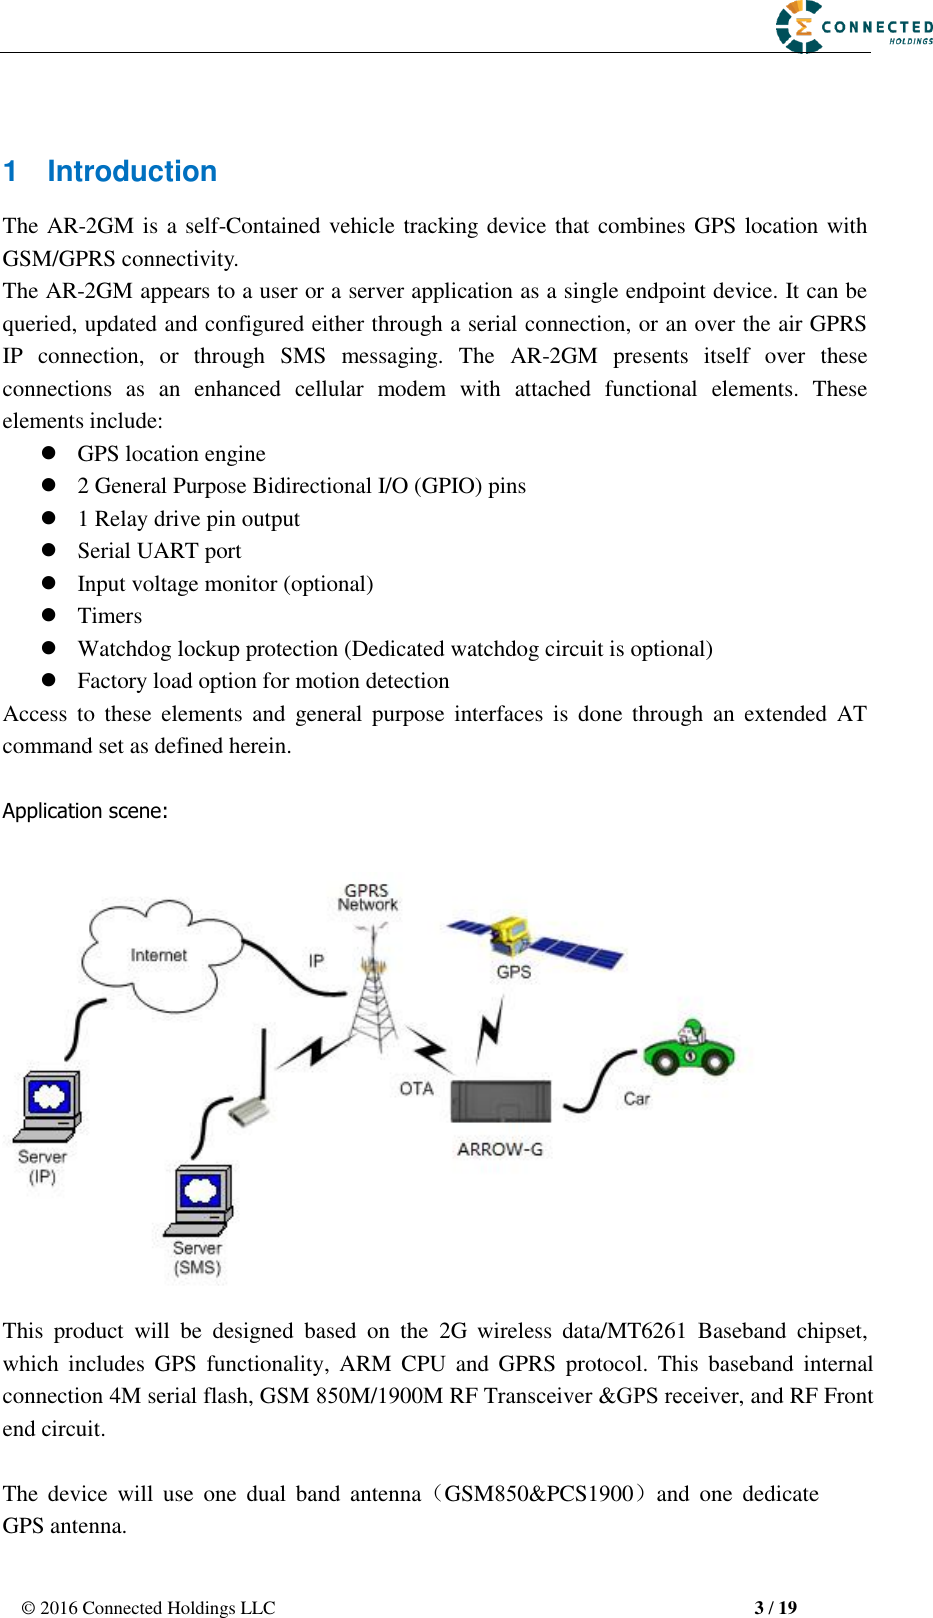 © 2016 Connected Holdings LLC  3 / 19 1  Introduction The AR-2GM is a self-Contained vehicle tracking device that combines GPS location with GSM/GPRS connectivity. The AR-2GM appears to a user or a server application as a single endpoint device. It can be queried, updated and configured either through a serial connection, or an over the air GPRS IP  connection,  or  through  SMS  messaging.  The  AR-2GM  presents  itself  over  these connections  as  an  enhanced  cellular  modem  with  attached  functional  elements.  These elements include:   GPS location engine2 General Purpose Bidirectional I/O (GPIO) pins1 Relay drive pin outputSerial UART portInput voltage monitor (optional)TimersWatchdog lockup protection (Dedicated watchdog circuit is optional)Factory load option for motion detectionAccess  to  these  elements  and  general  purpose  interfaces  is  done  through  an  extended  AT command set as defined herein. Application scene: This  product  will  be  designed  based  on  the  2G  wireless  data/MT6261  Baseband  chipset, which  includes  GPS  functionality,  ARM  CPU  and  GPRS  protocol.  This  baseband  internal connection 4M serial flash, GSM 850M/1900M RF Transceiver &amp;GPS receiver, and RF Front end circuit. The  device  will  use  one  dual  band  antenna（GSM850&amp;PCS1900）and  one  dedicateGPS antenna. 